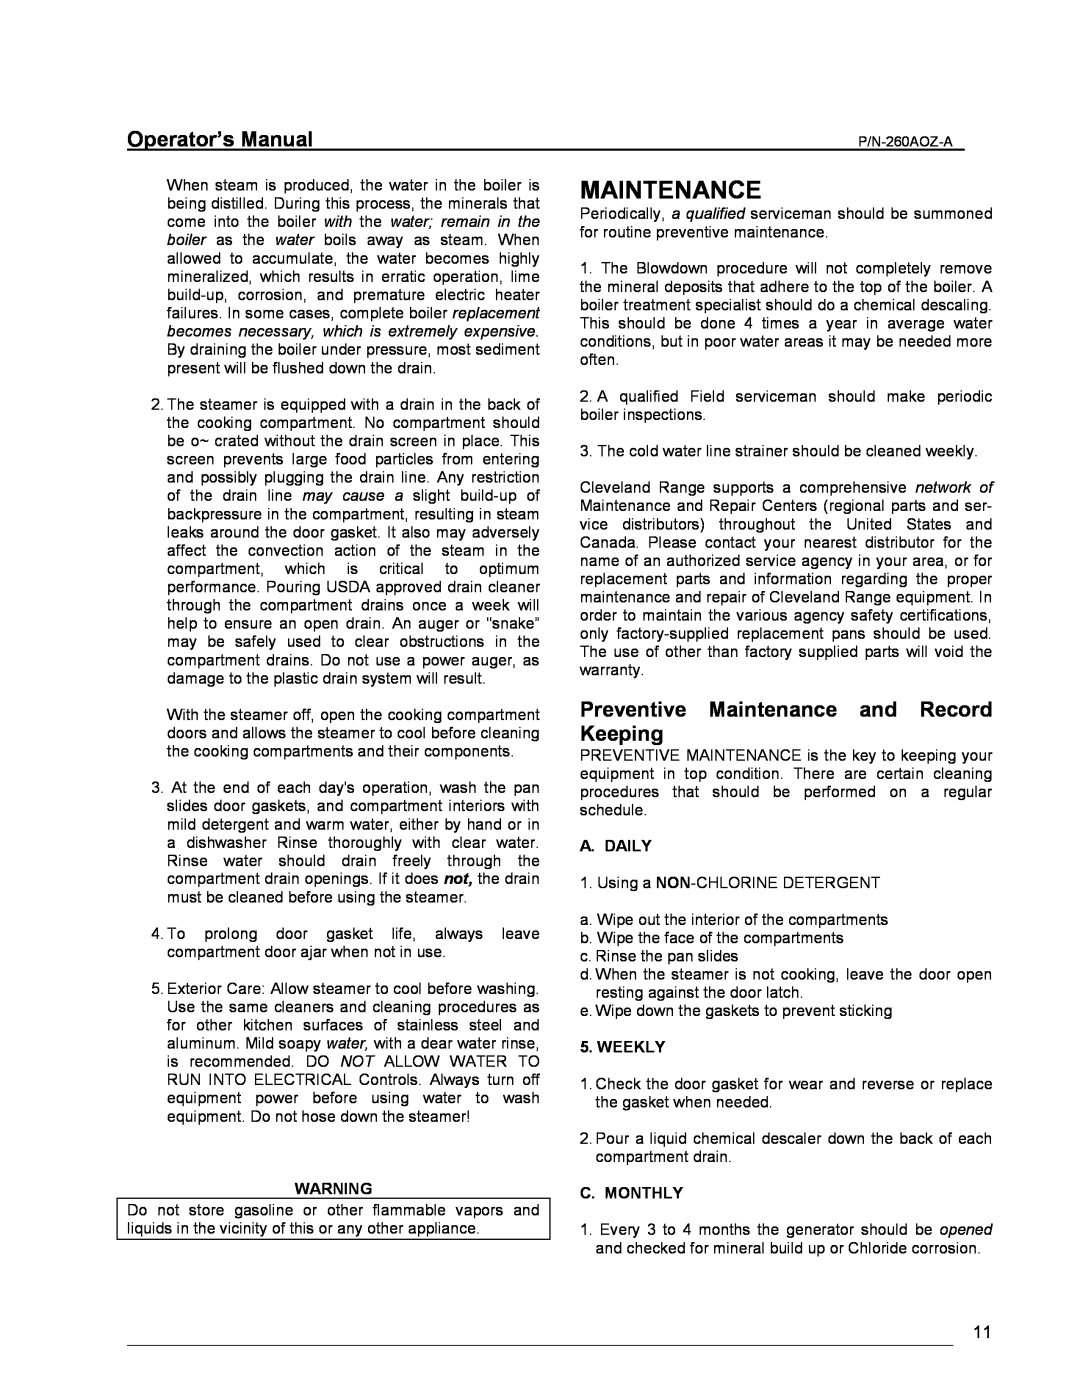 Cleveland Range 24/36CGM Preventive Maintenance and Record Keeping, Operator’s Manual, A. Daily, Weekly, C. Monthly 